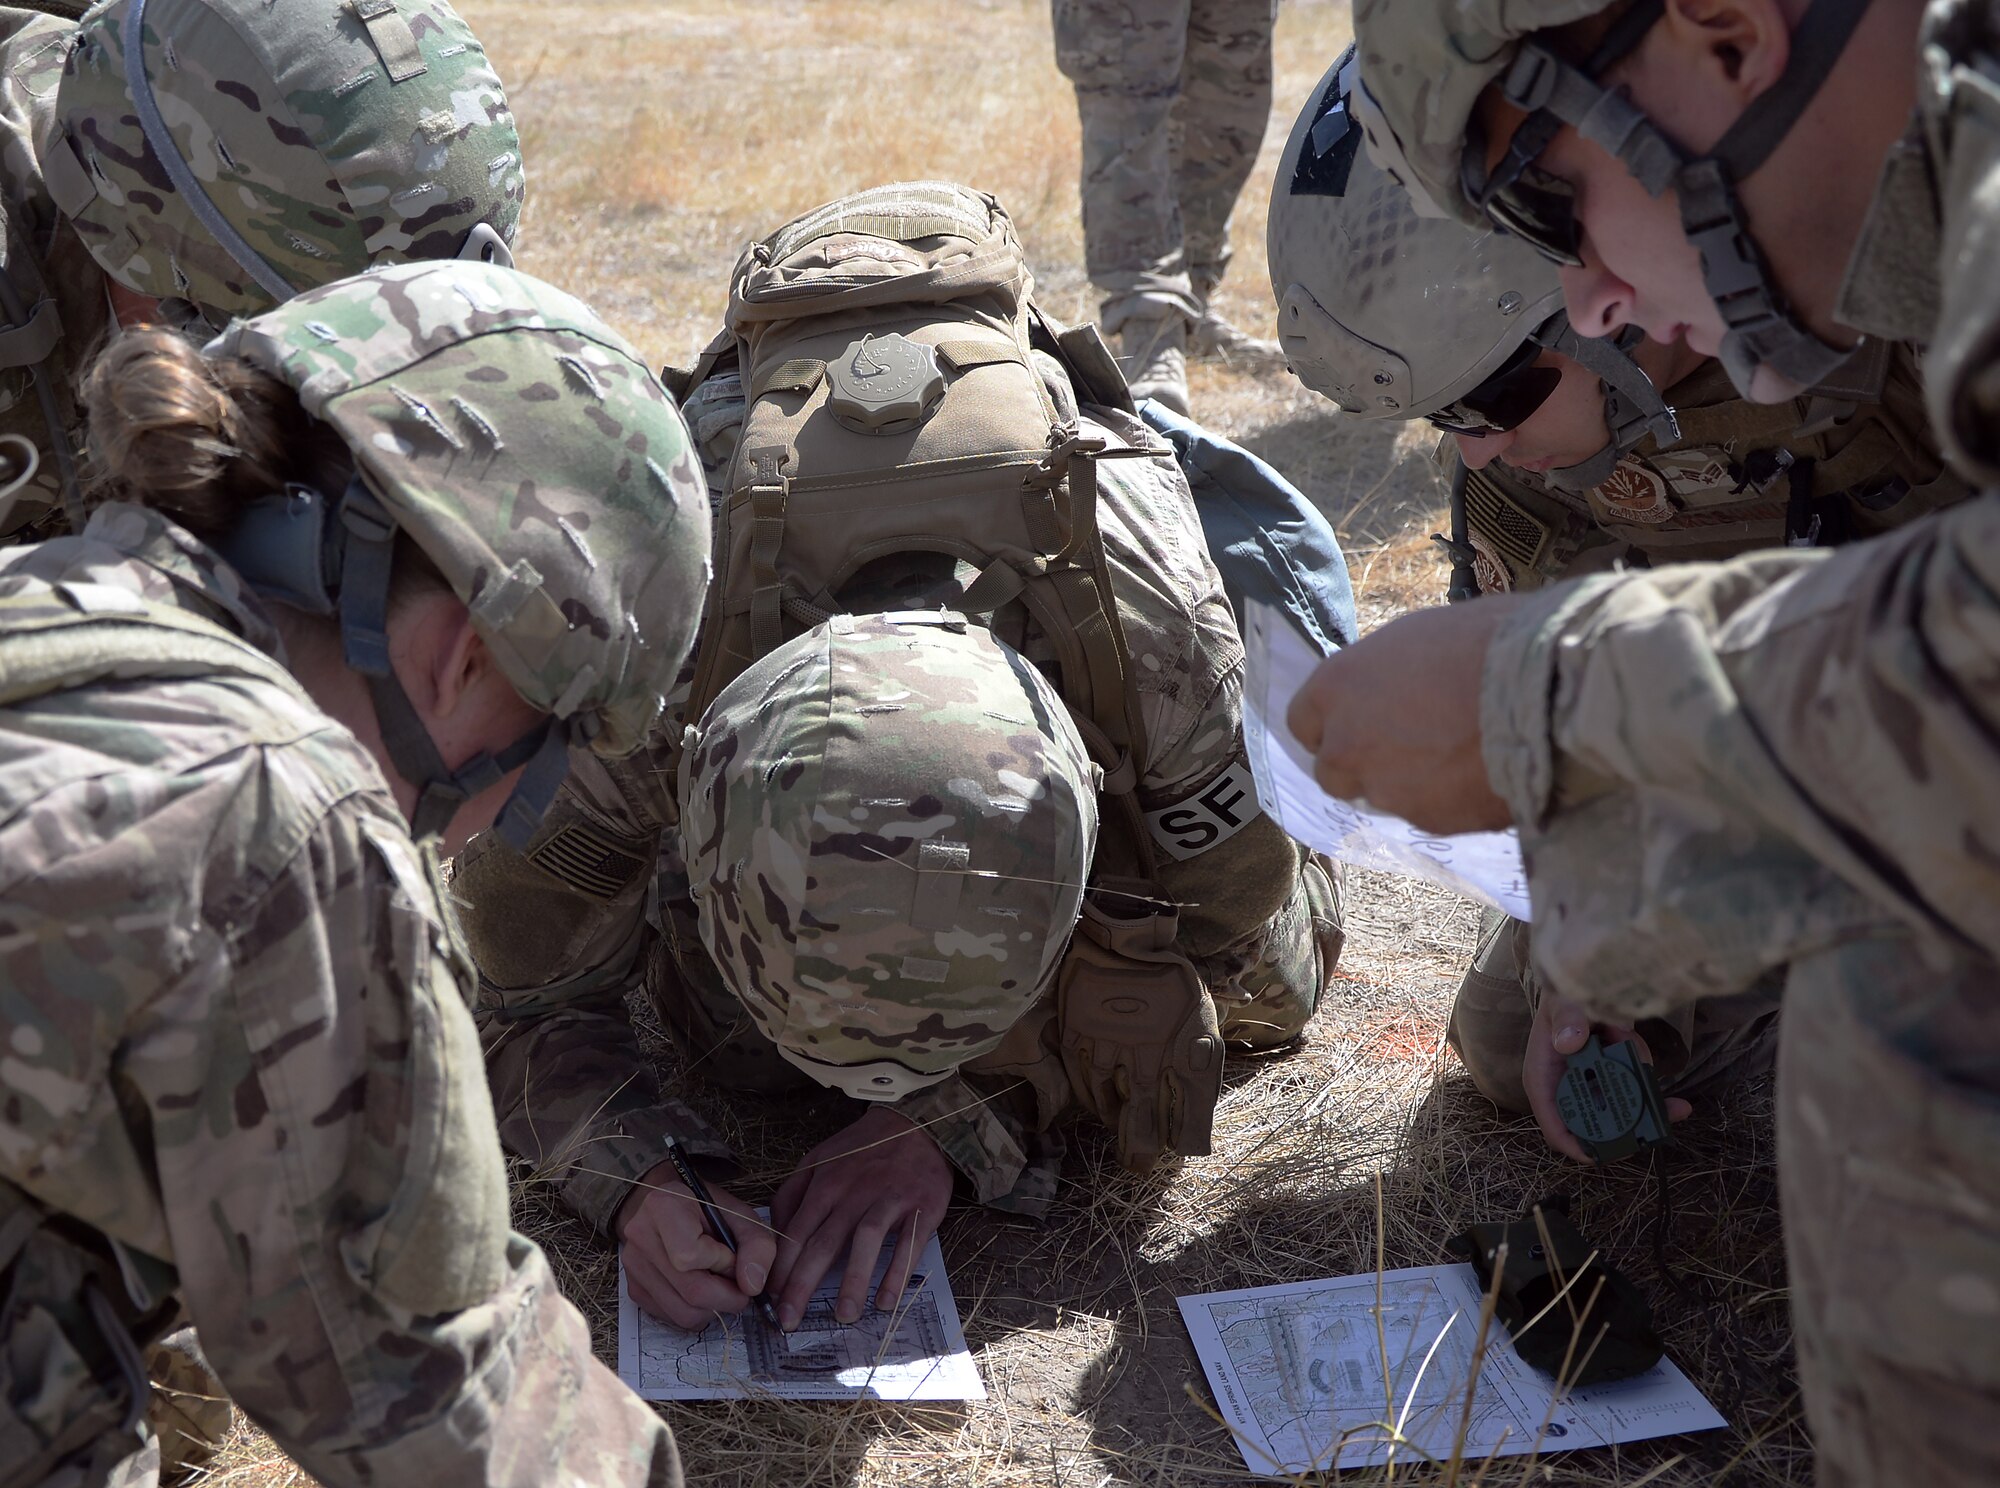 The F.E. Warren Air Force Base, Wyo.'s, 2015 Air Force Global Strike Command team plots coordinates on a map during the land navigation portion of the 2015 Global Strike Challenge security forces competition on Camp Guernsey, Wyo., Sept. 22, 2015. Teams had to work together to find exact locations on a map and then navigate to them in Camp Guernsey's north training area. (U.S. Air Force photo by Senior Airman Brandon Valle)